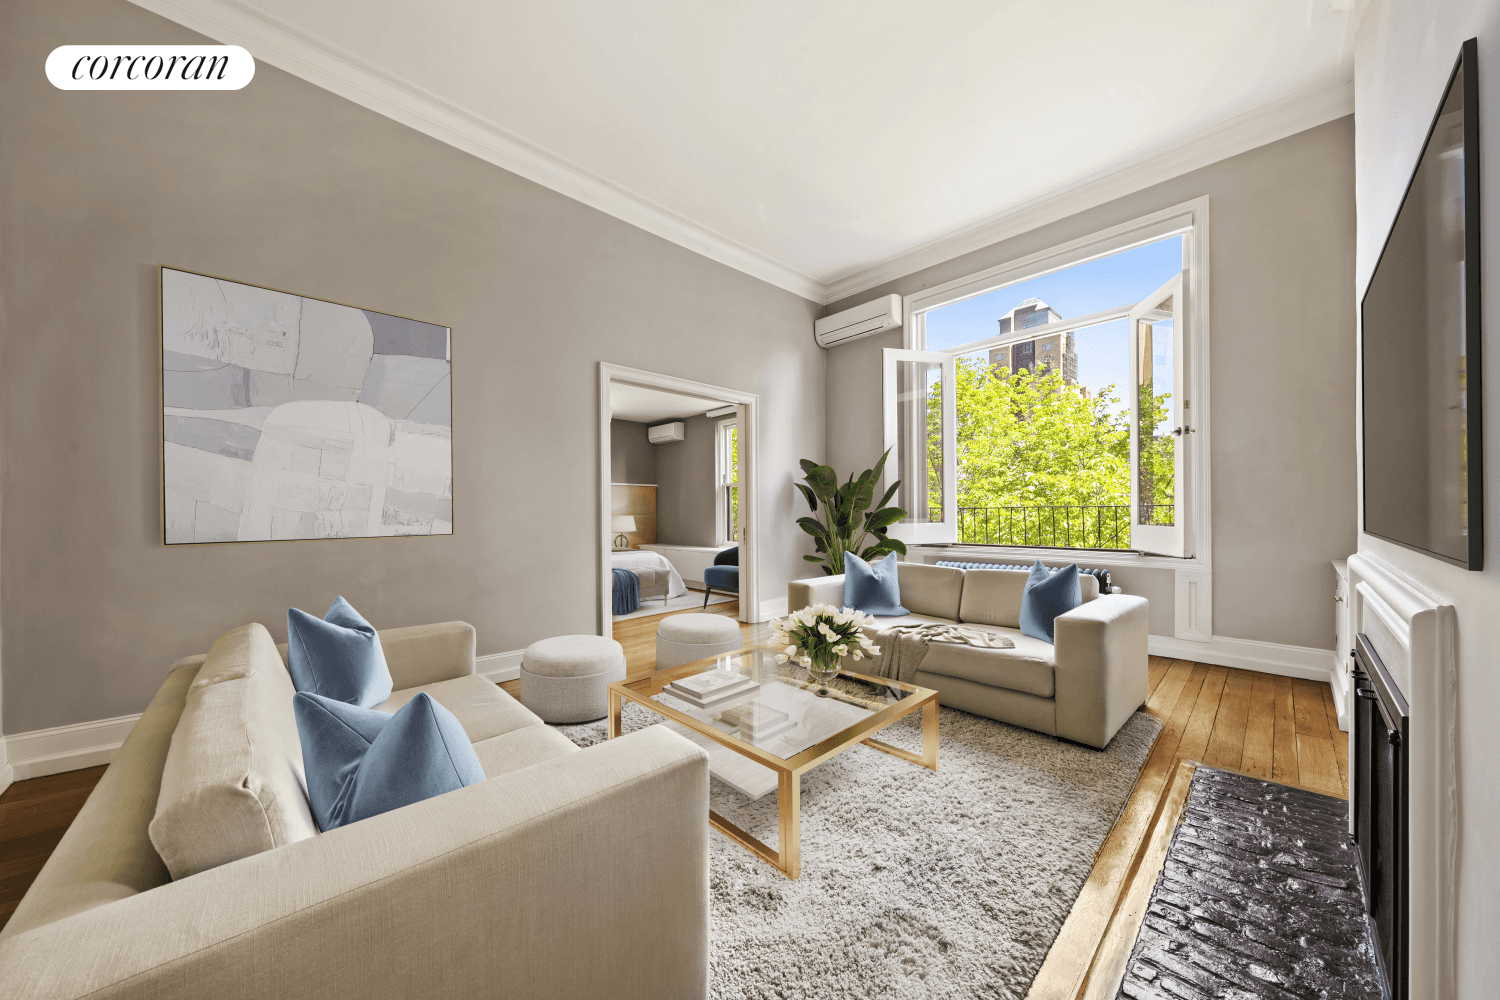 This pied a terre friendly one of a kind two bedroom two bathroom home is perched on the top floor of a boutique part time doorman cooperative.